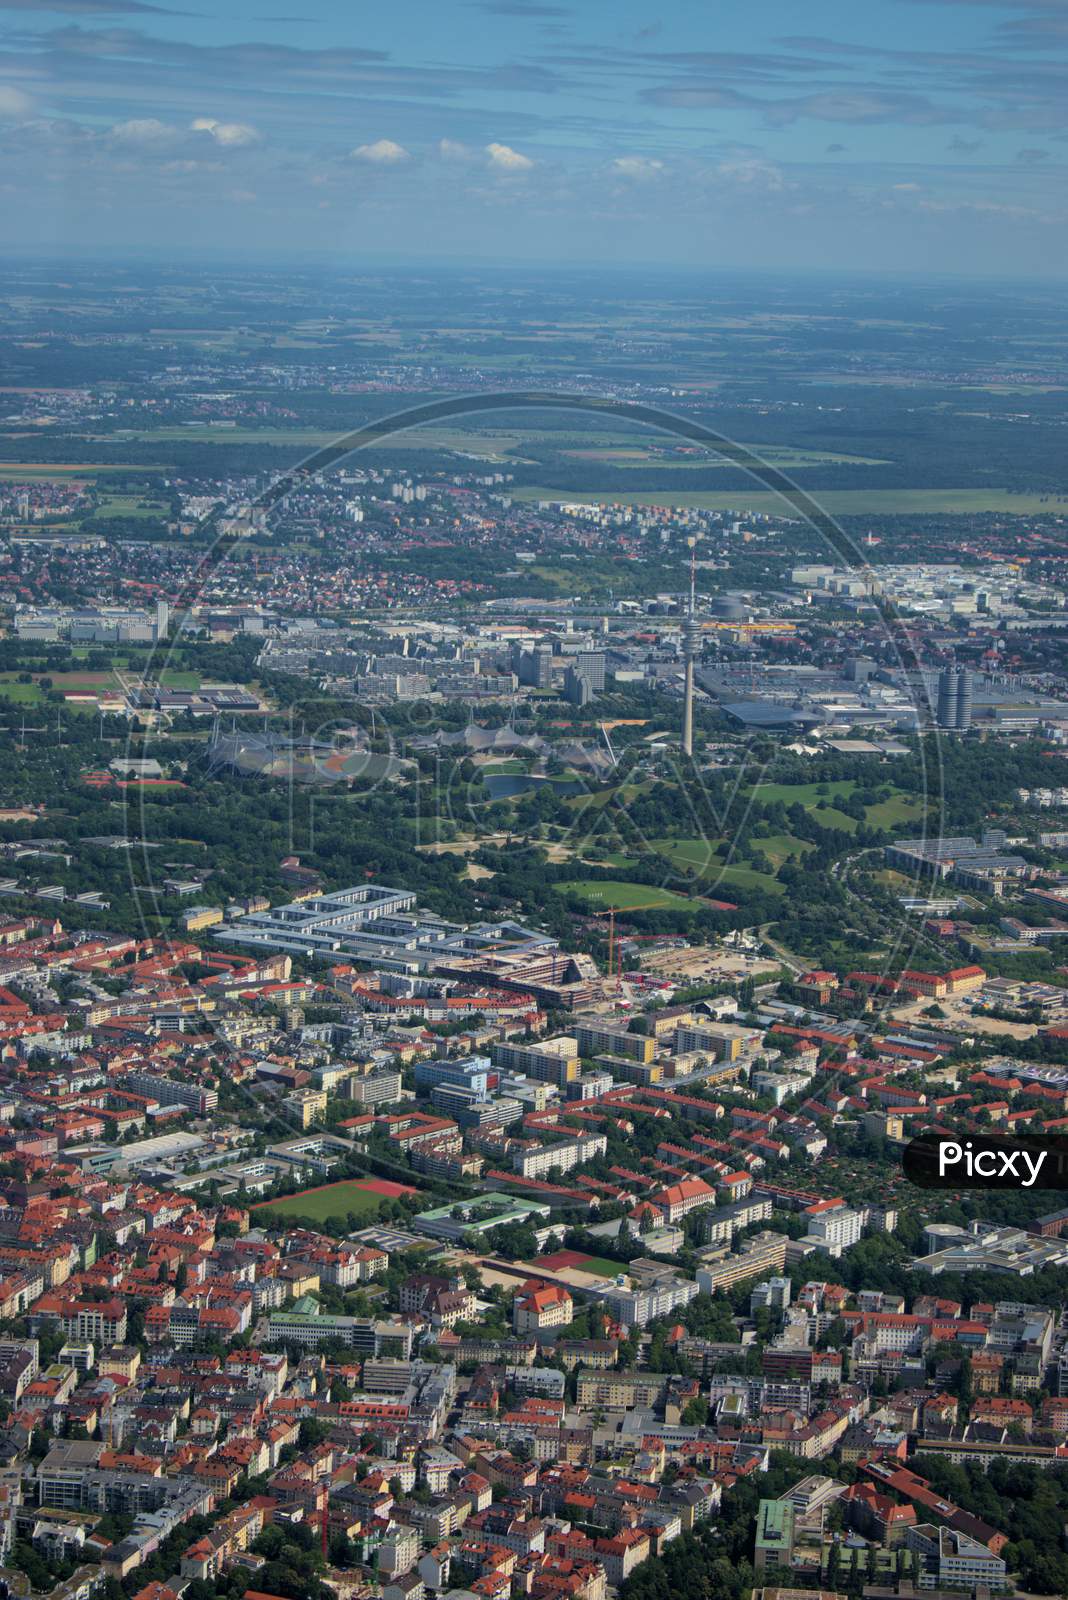 Olympic stadium in Munich from above 5.7.2020